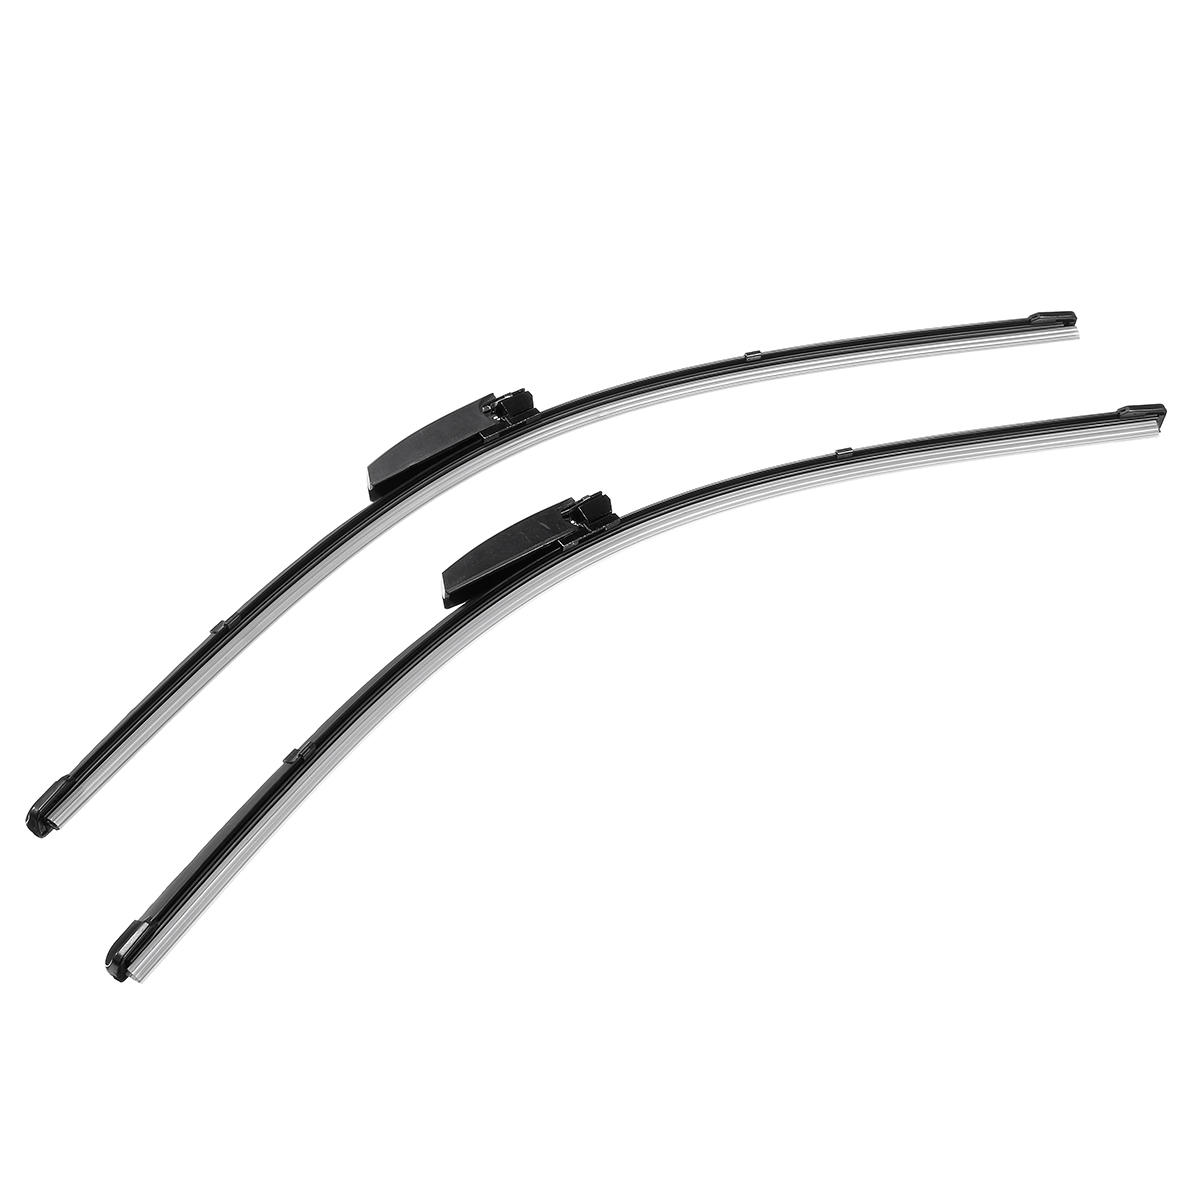 24/" FOR MERCEDES-BENZ C-CLASS T-MODEL 2007 ON FRONT WIPER BLADES PAIR 24/"